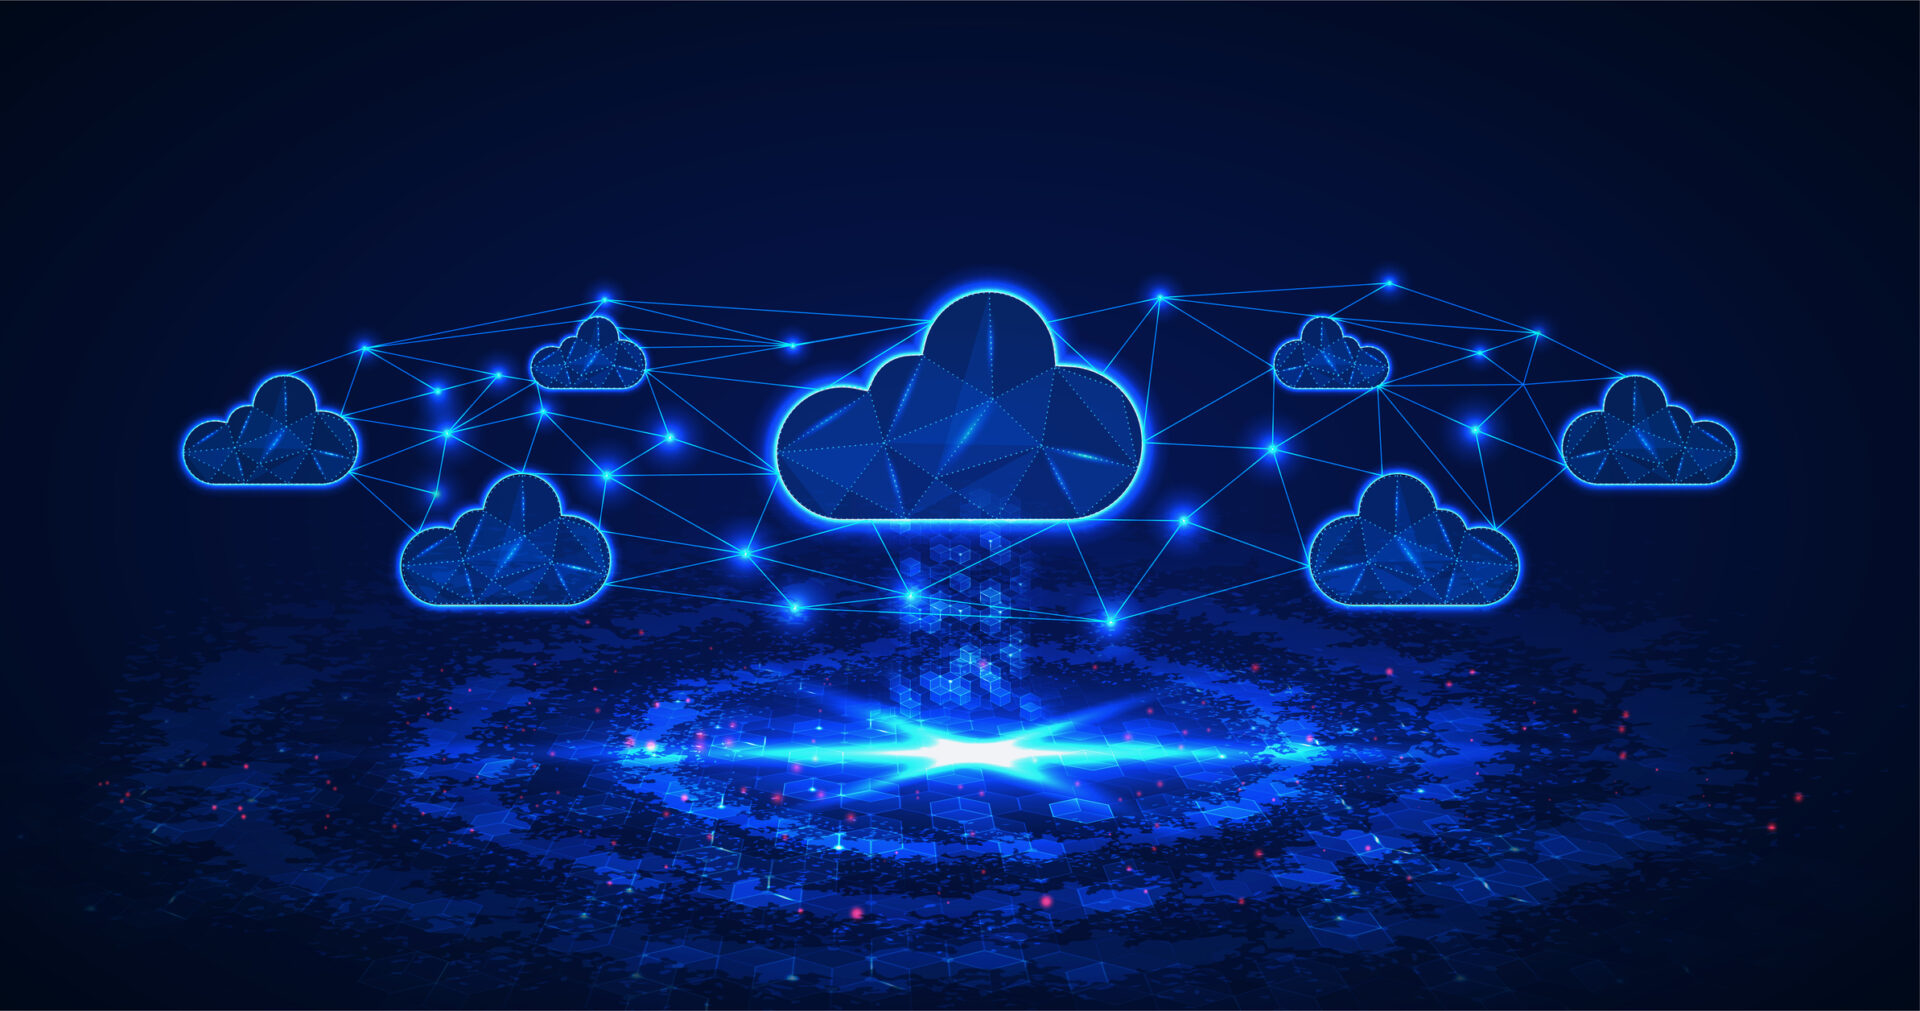 Multi-cloud Networking Increasingly Fuels Modern Applications